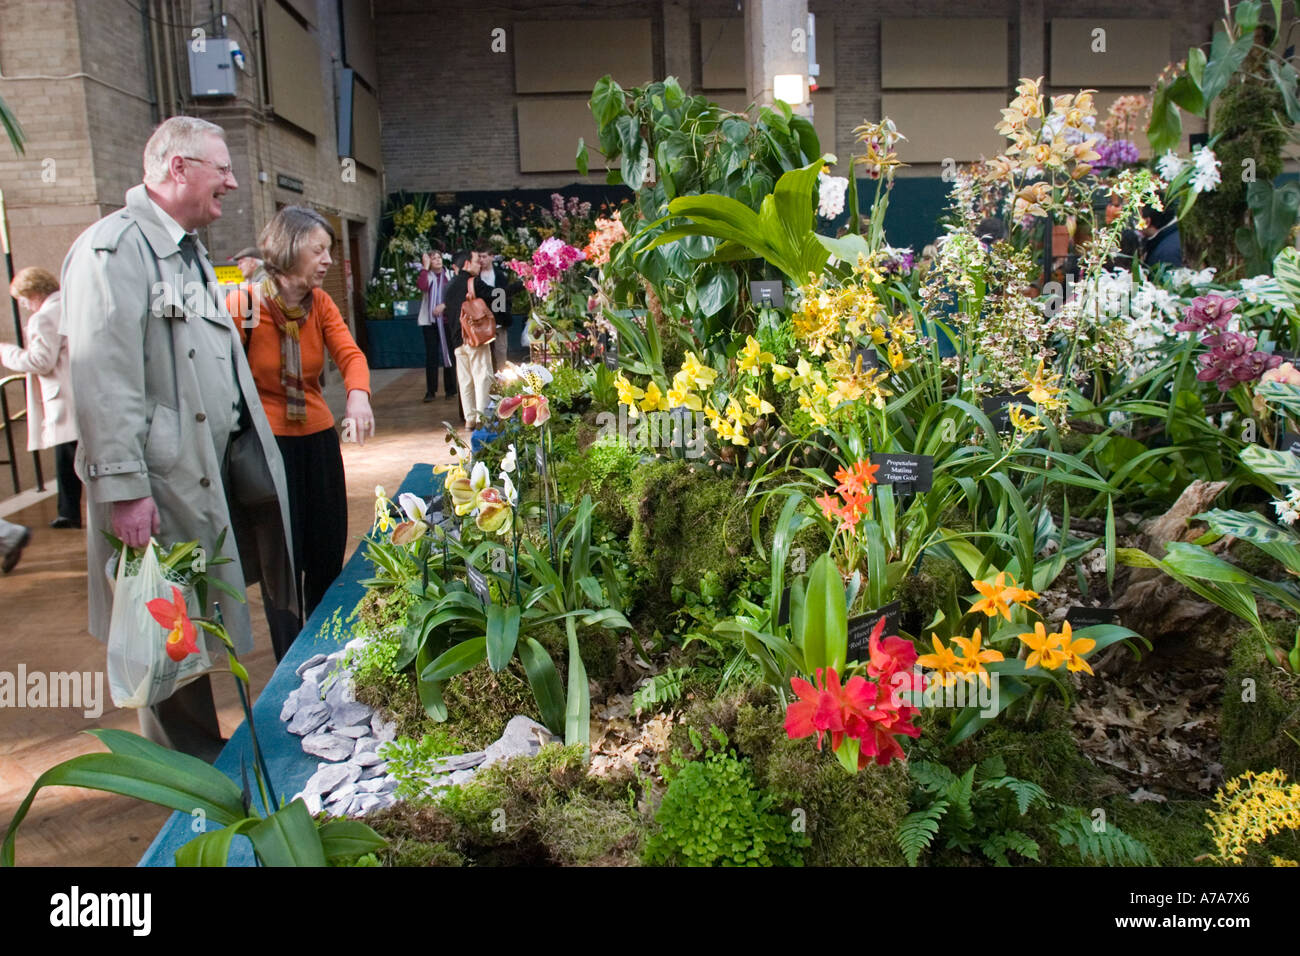 Display of Orchids at London Flower Show Stock Photo